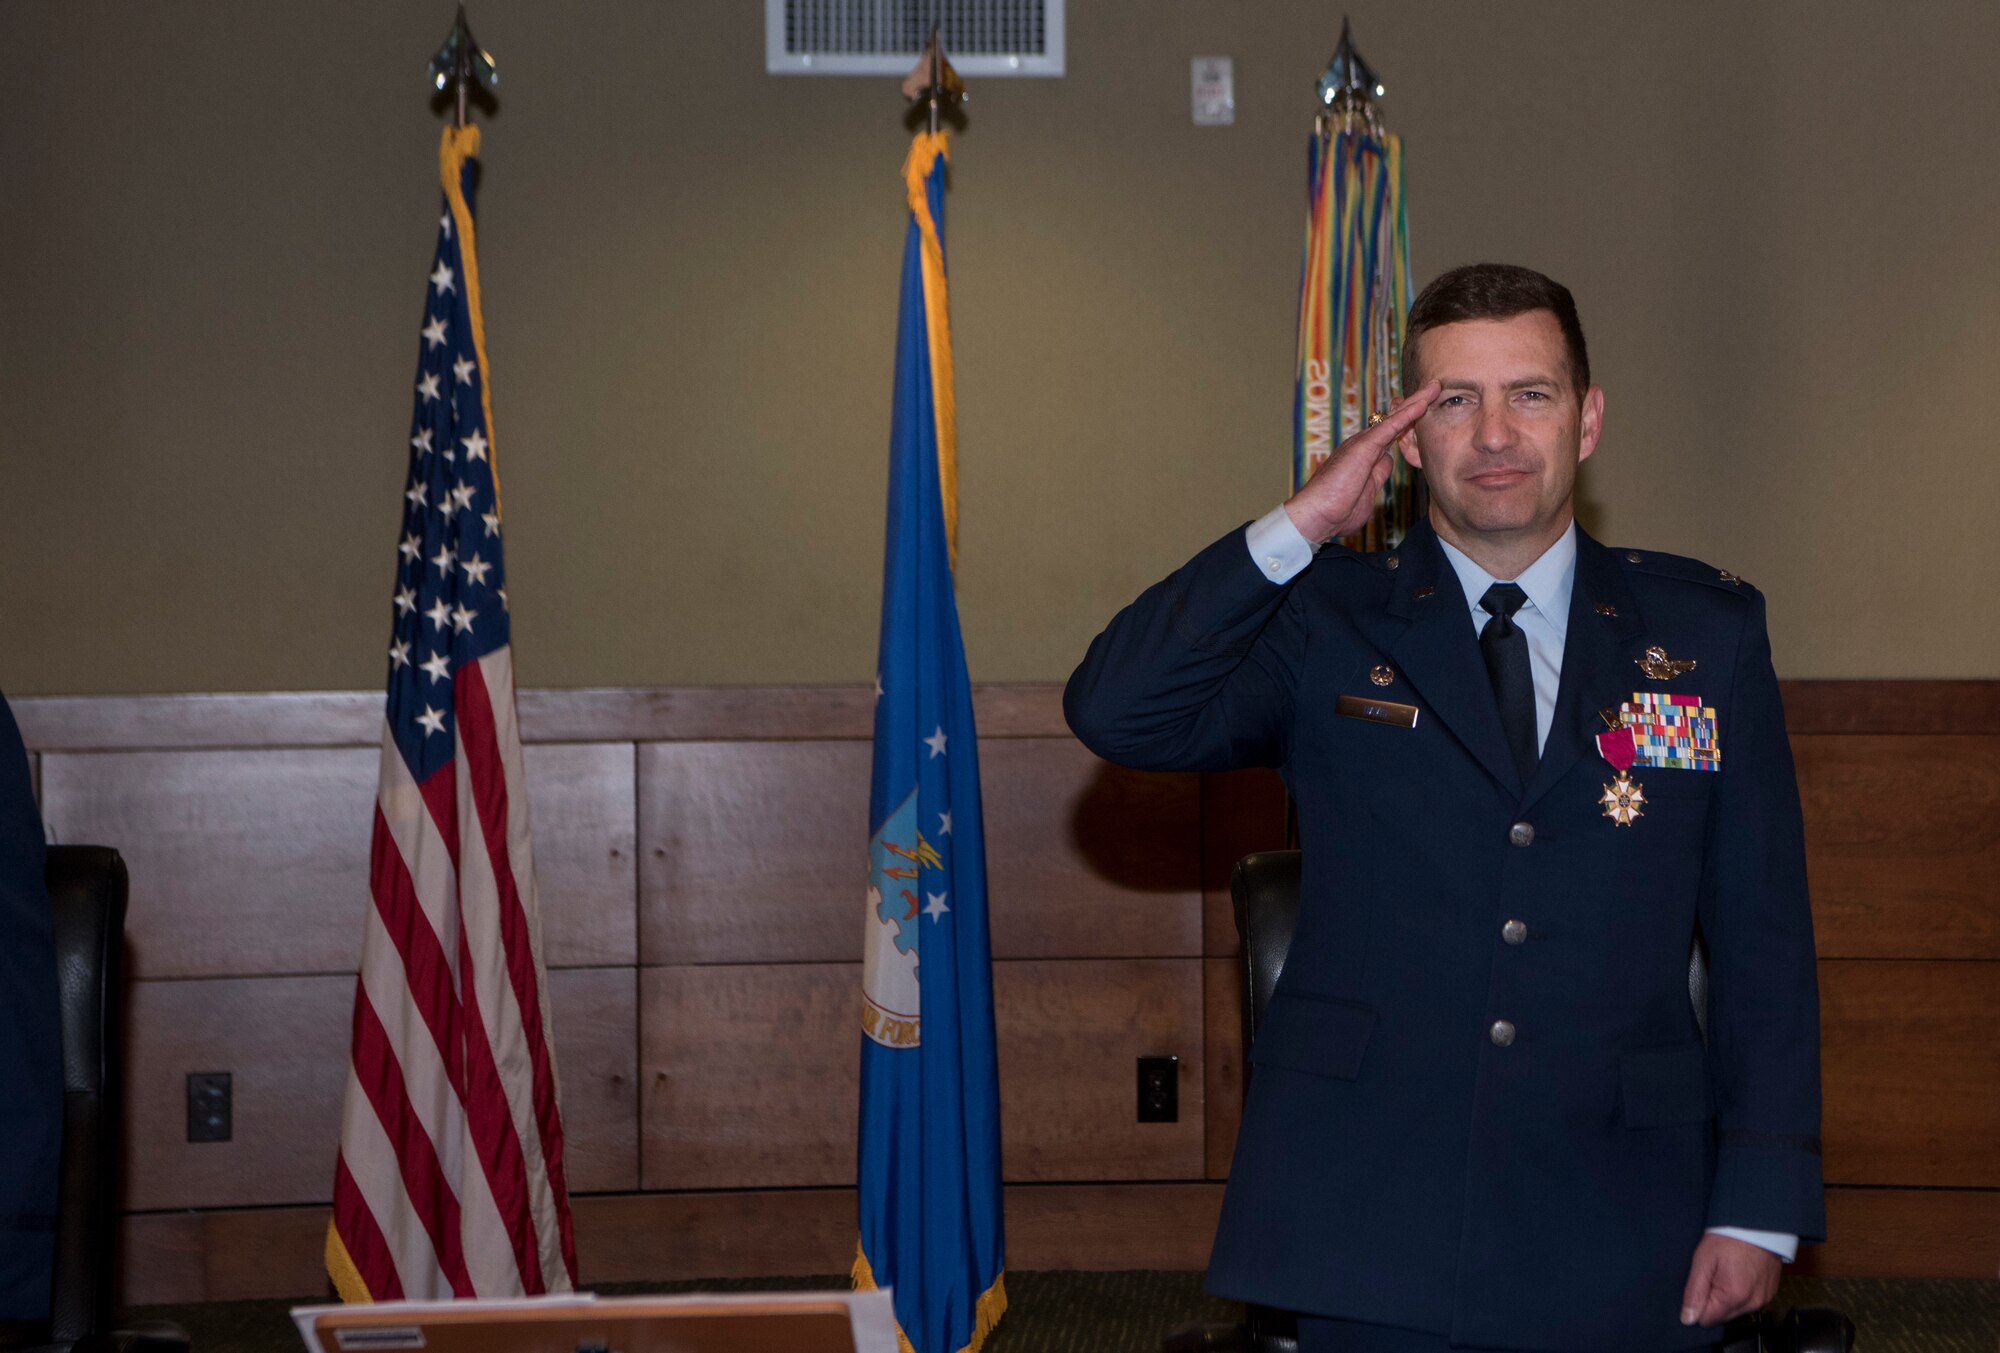 U.S. Air Force Col. Robert Davis renders a salute after receiving a Legion of Merit medal as he relinquishes command of the wing to U.S. Air Force Col. Travolis Simmons during the 3rd Wing change of command ceremony at Joint Base Elmendorf-Richardson, Alaska, July 17, 2020. The 3rd WG provides trained and equipped tactical air dominance forces, command and control platforms, and strategic and tactical airlift resources for contingency operations and also provides immediate early airborne detection, warning, surveillance and interception of hostile forces within the Alaskan North American Aerospace Defense Command Region. The ceremony was adapted to comply with COVID-19 health and safety measures.